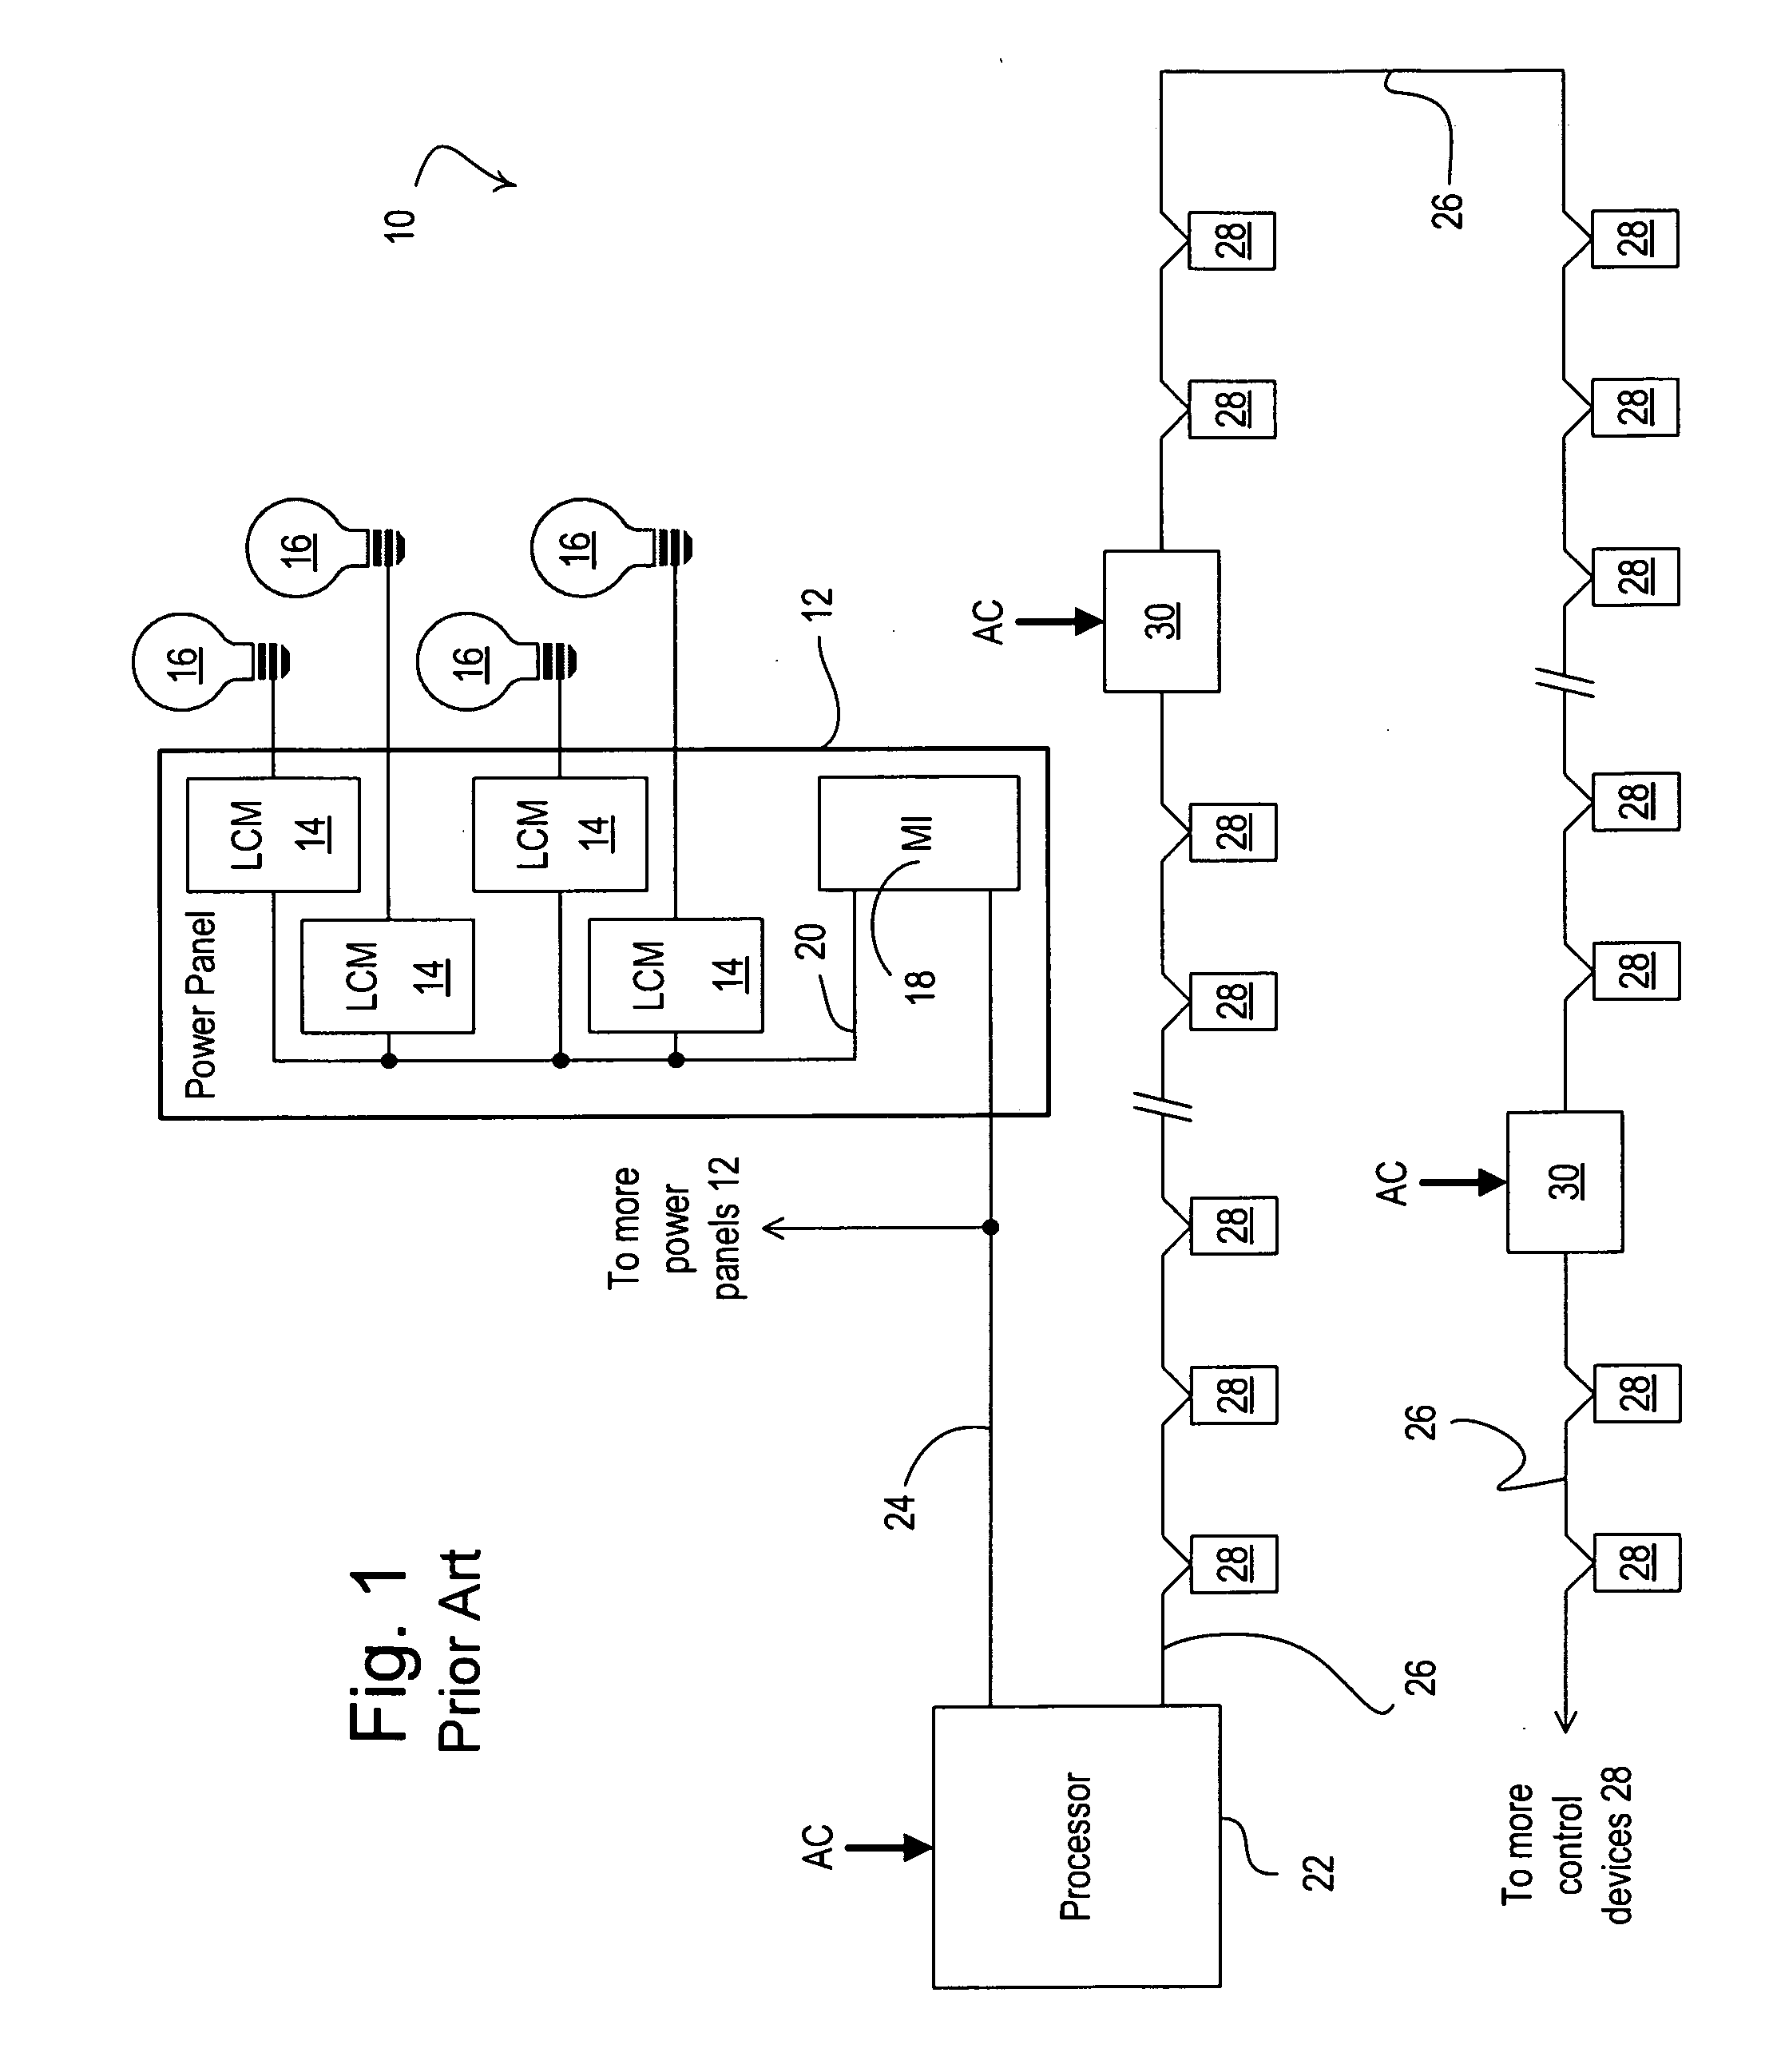 Load control system having a plurality of repeater devices